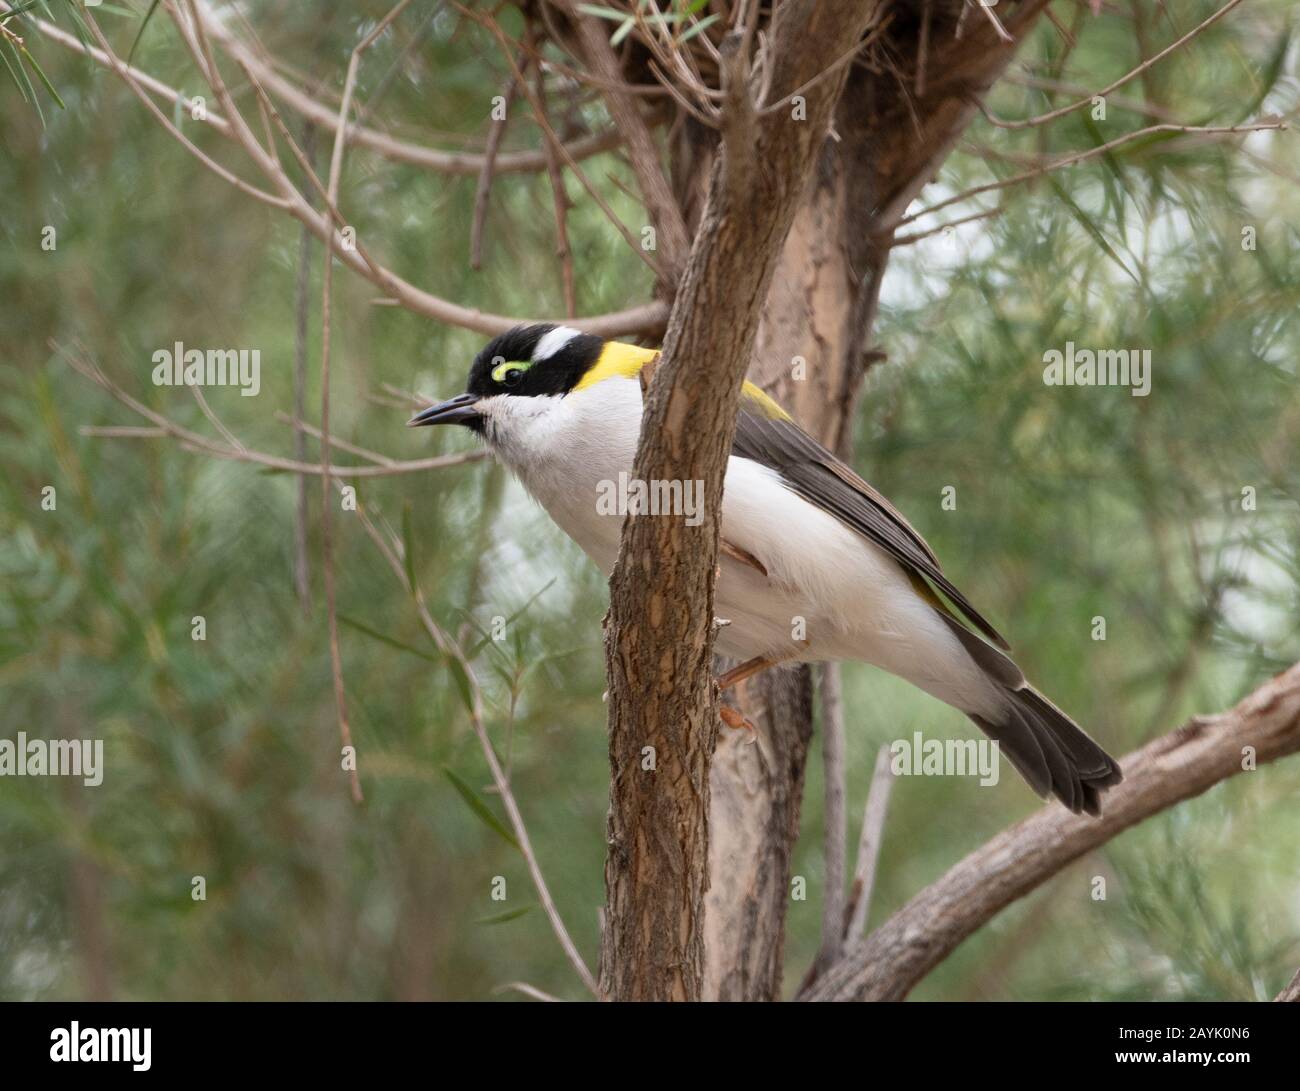 Golden-backed Honeyeater or Black-chinned Honeyeater (Melithreptus gularis) perched in a tree Stock Photo